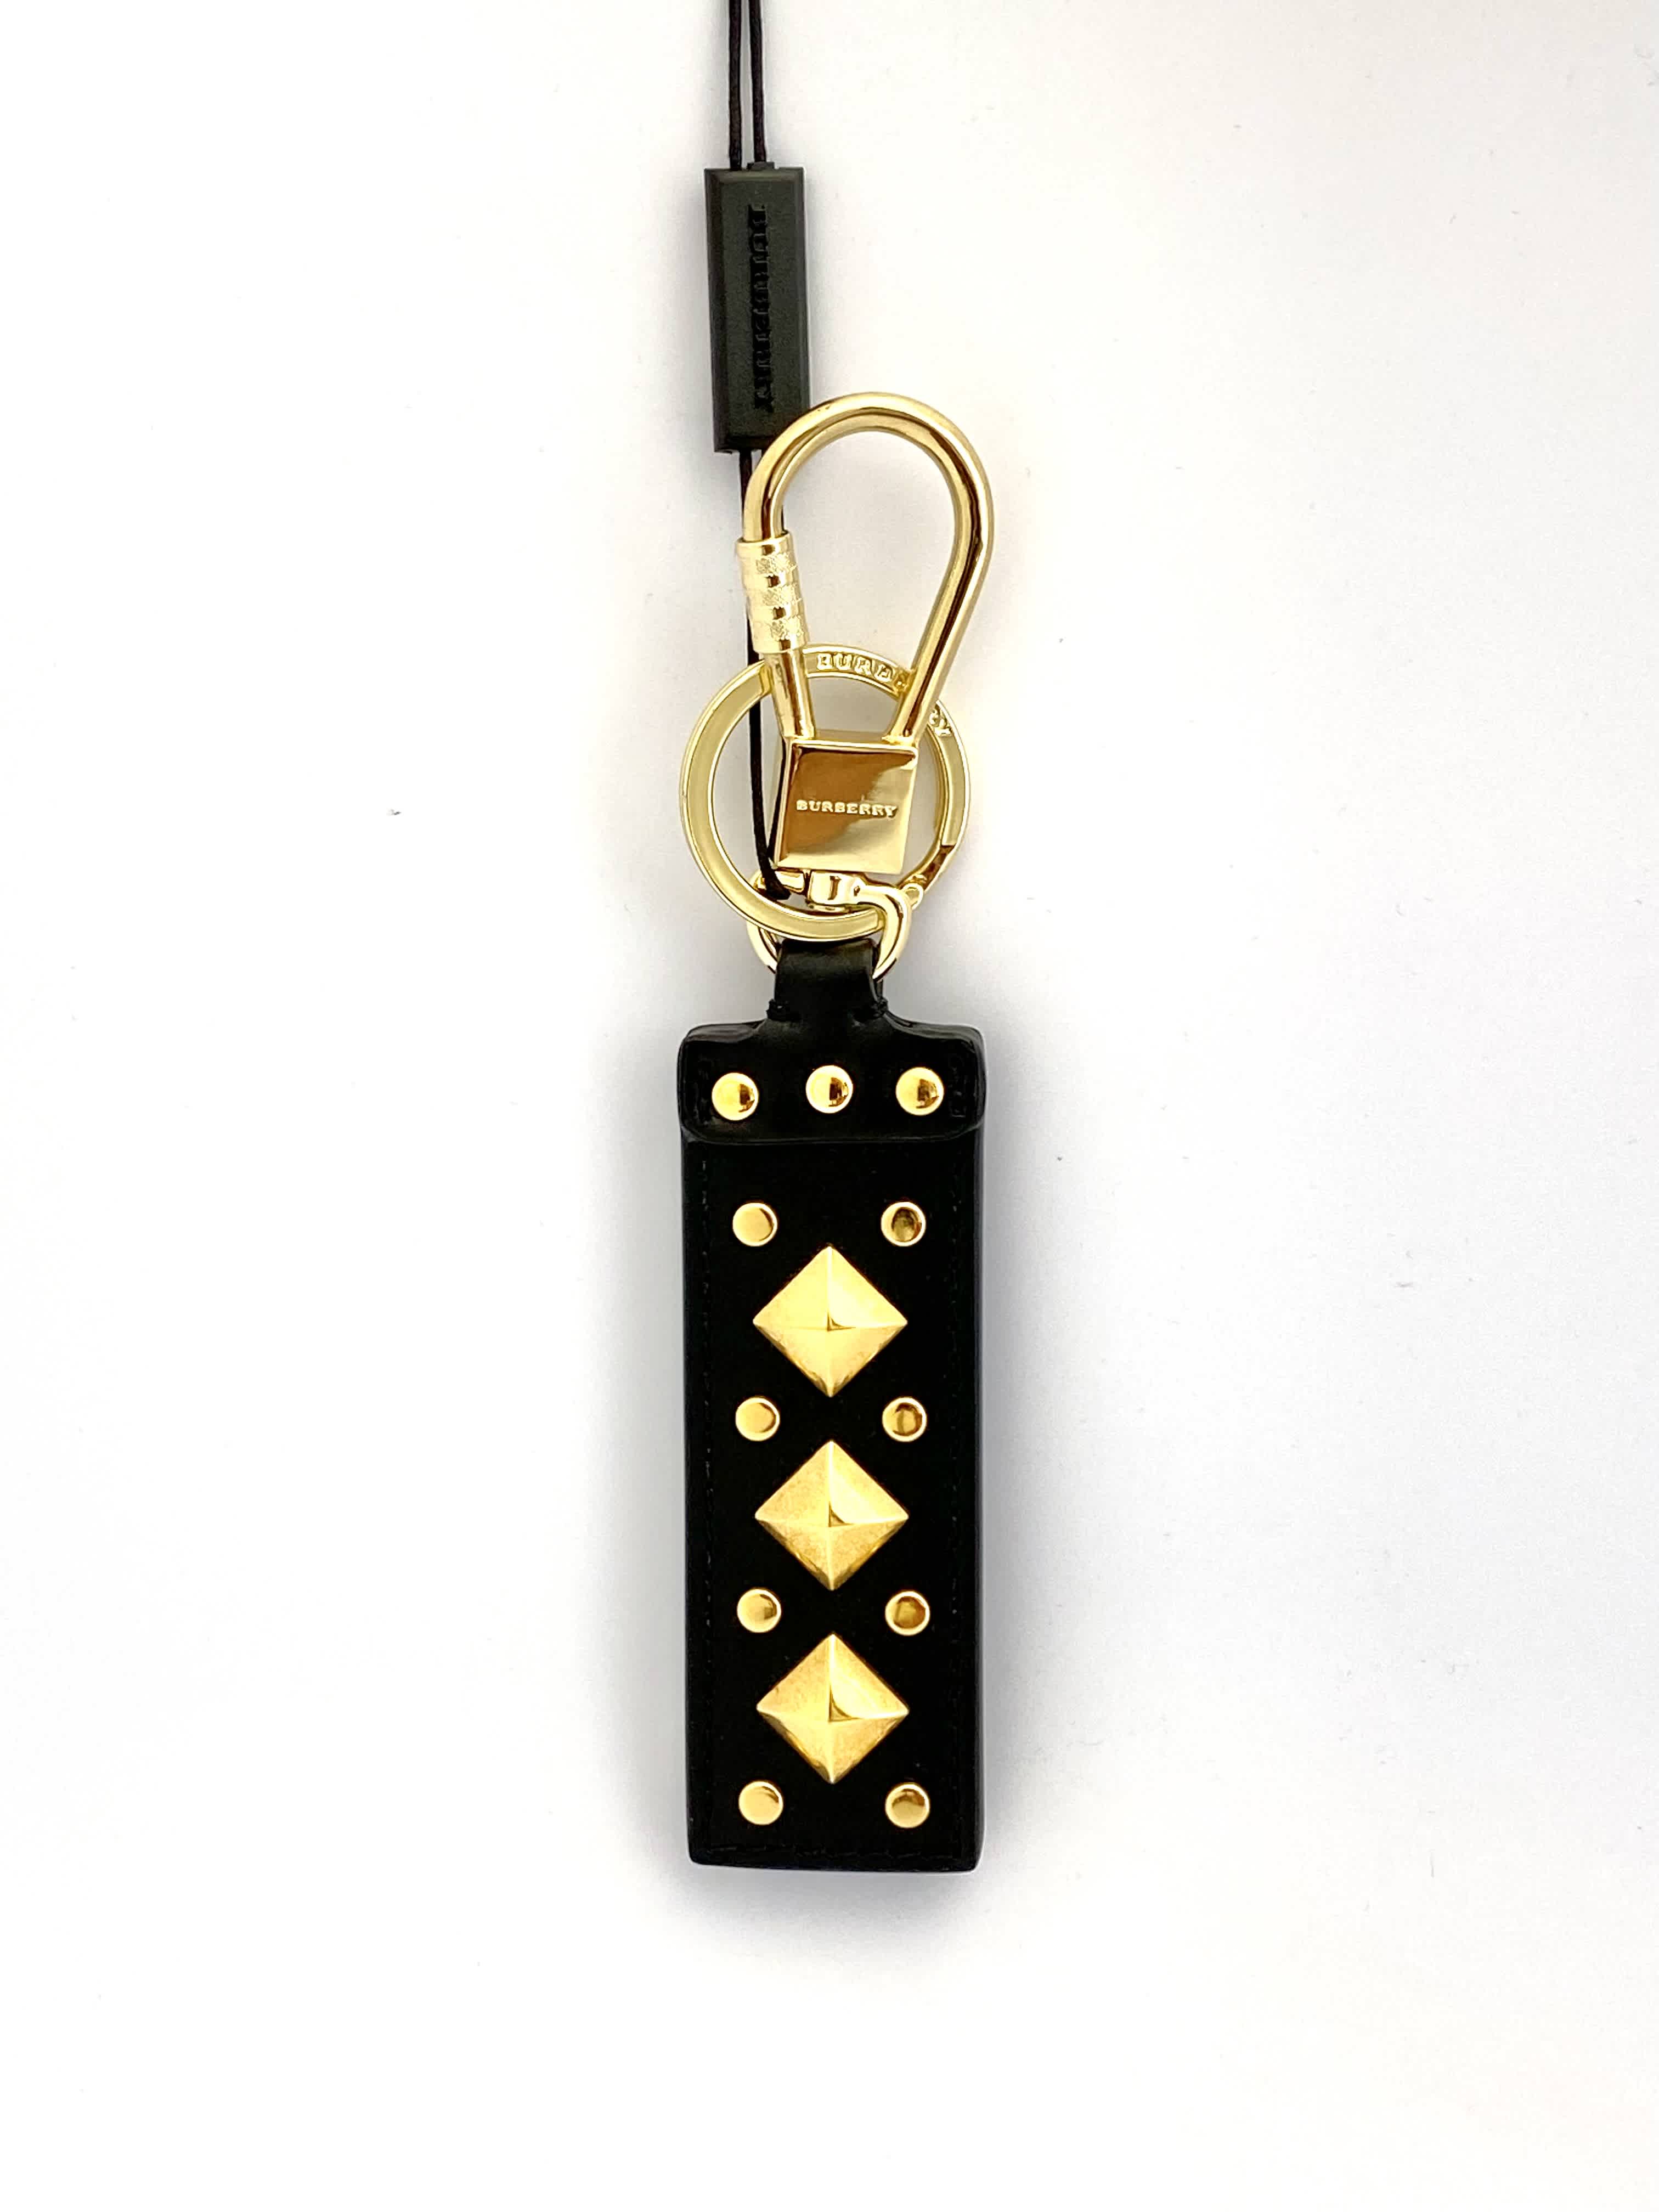 Burberry Studded Leather Key Ring In Black,gold Tone